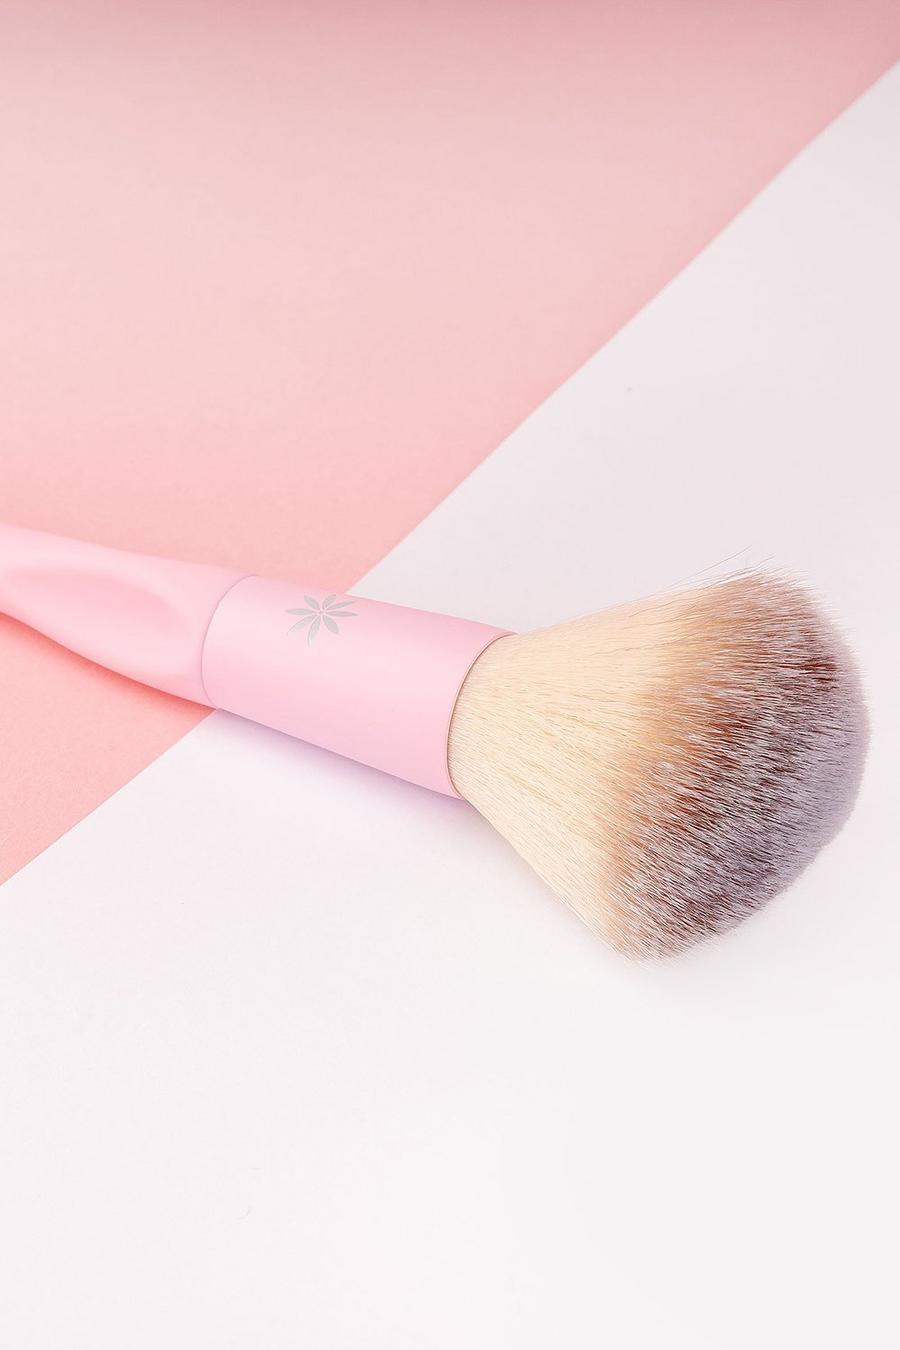 Brushworks Hd - Pennello da fard, Baby pink image number 1